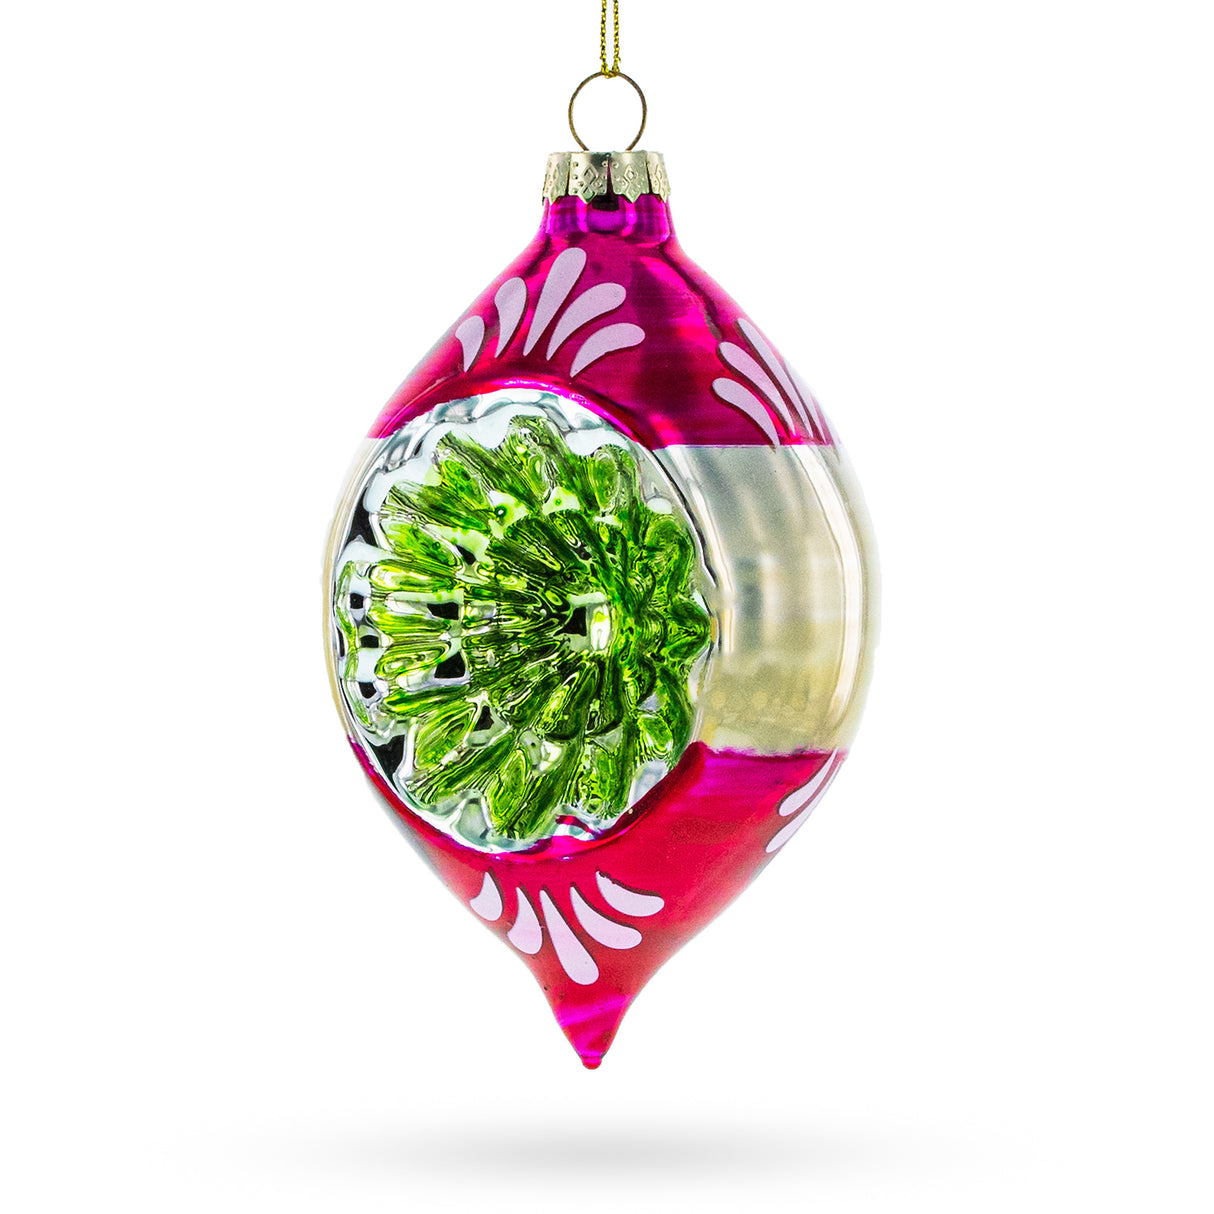 Vintage Tinsel - Retro-Inspired Blown Glass Christmas Ornament in Multi color, Rhombus shape